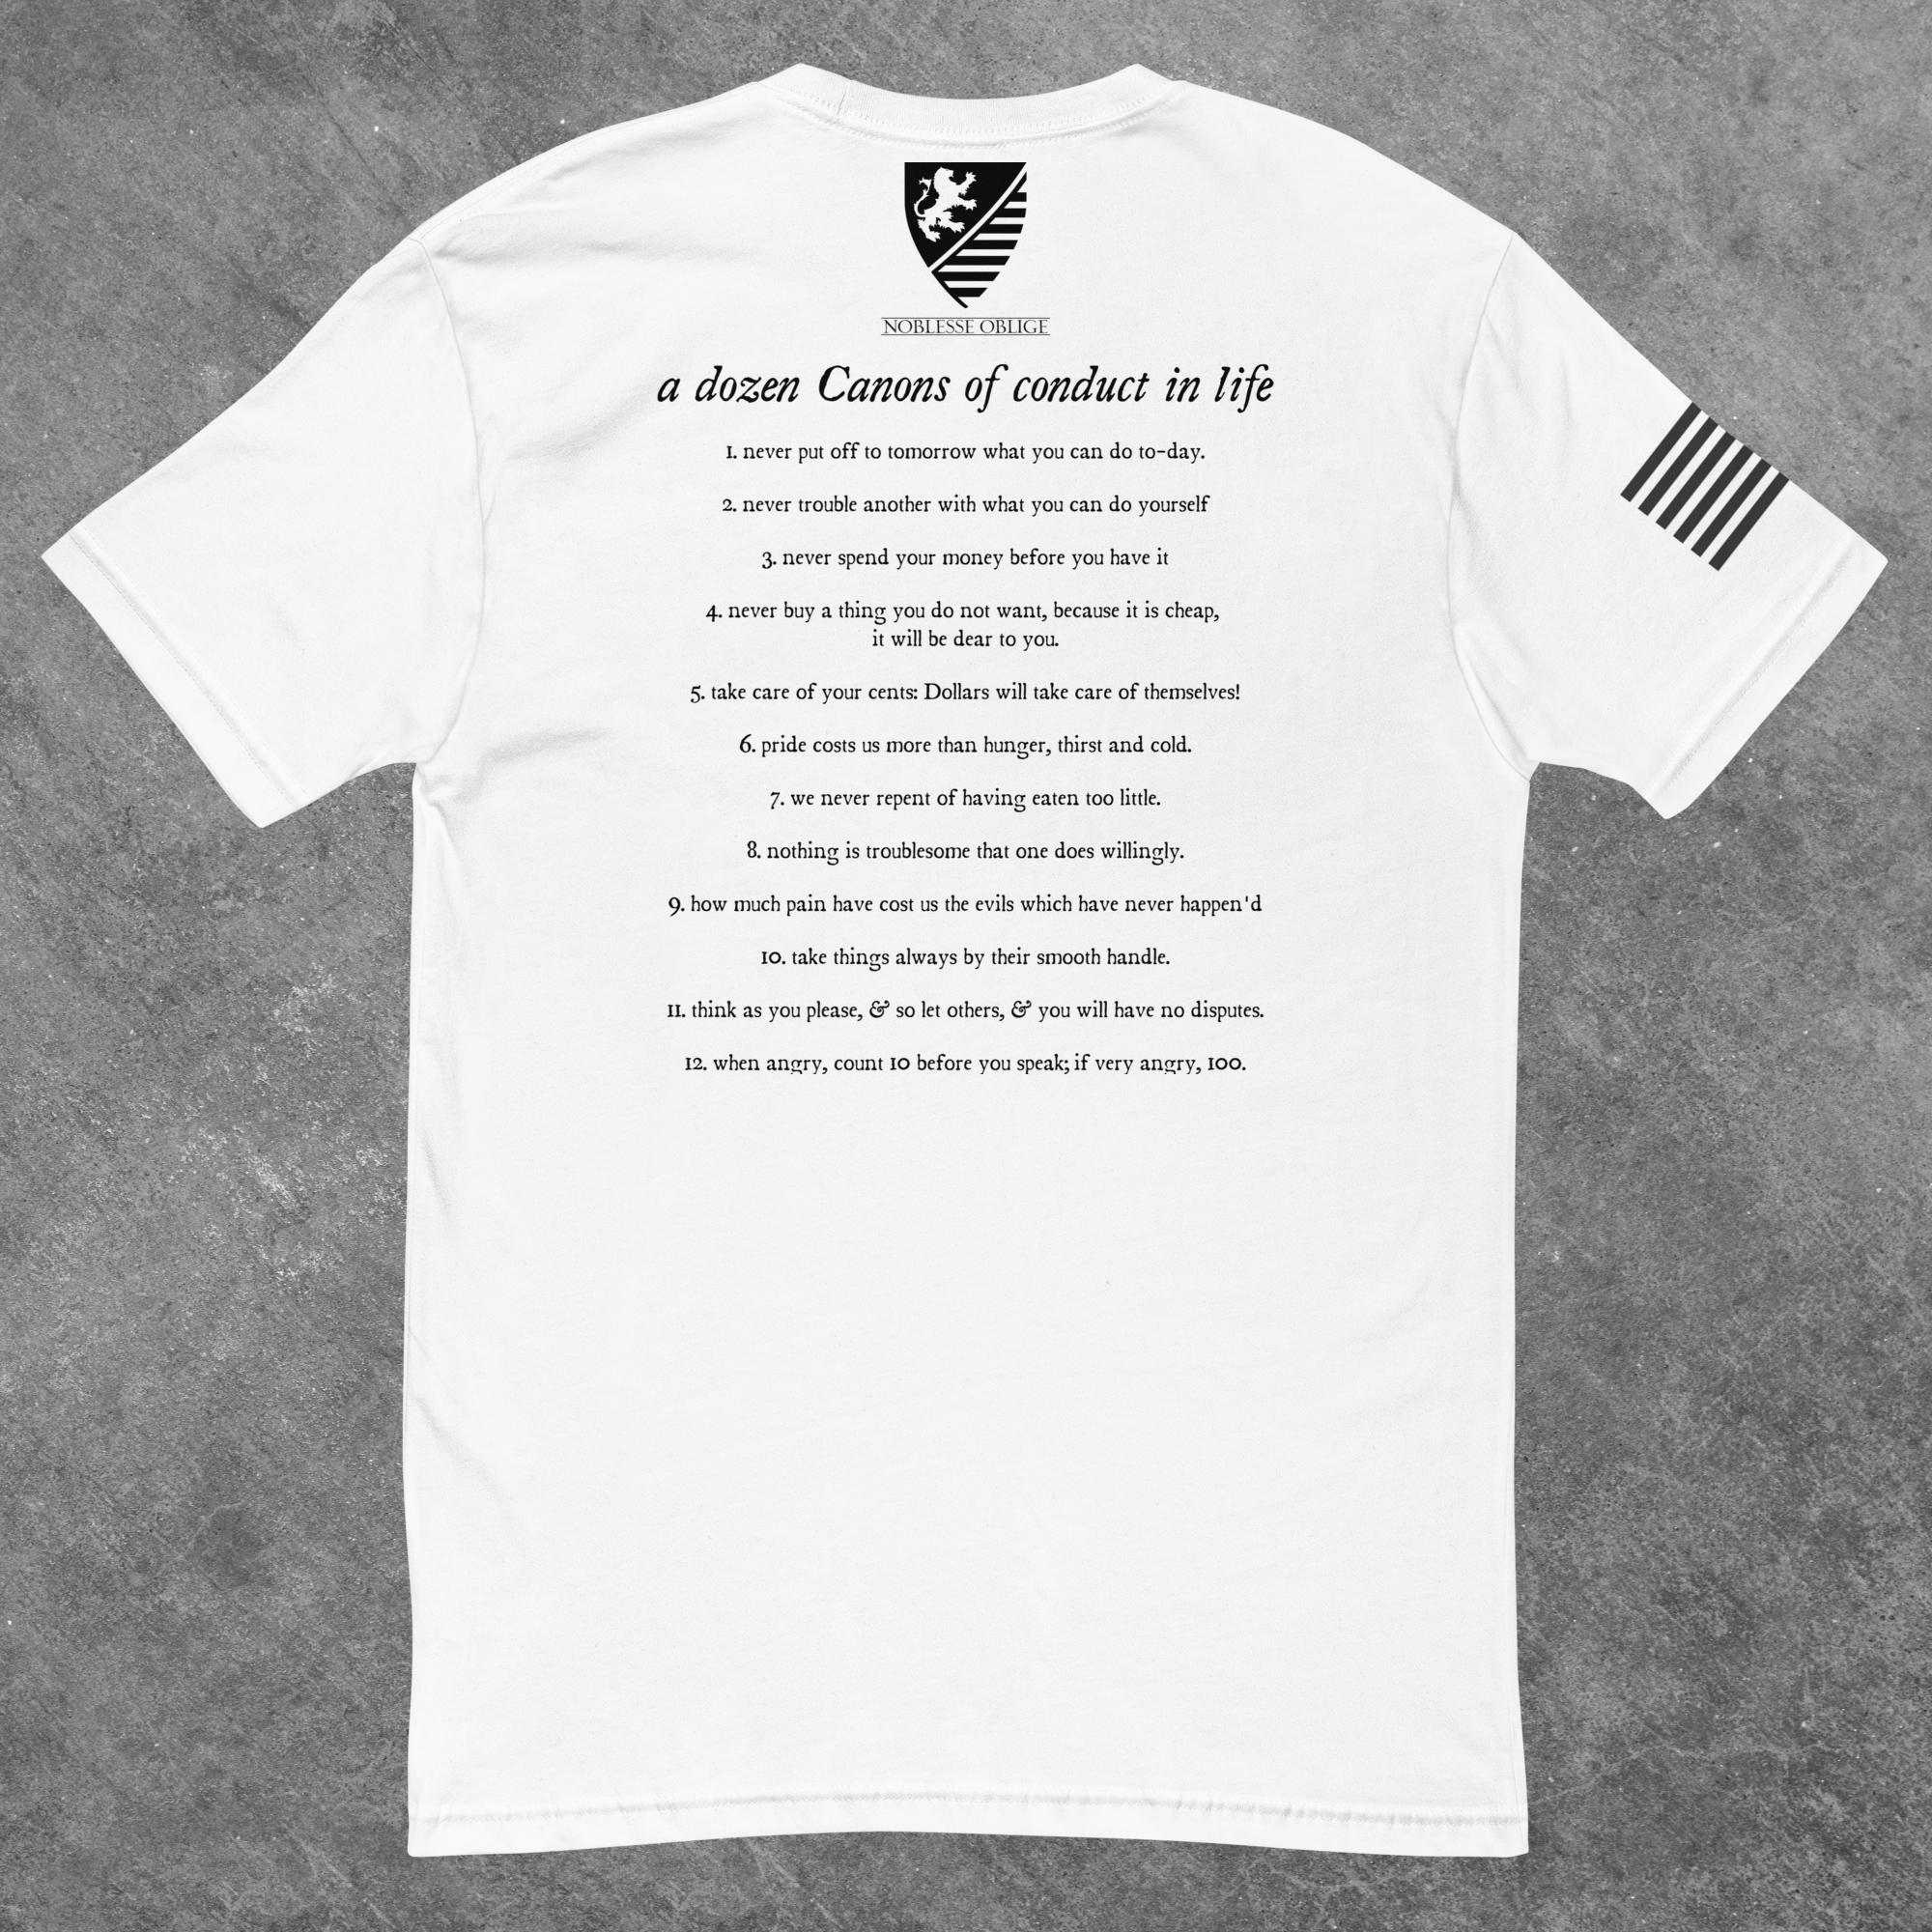 Jefferson's 12 Canons of Conduct - Men's Fitted T-Shirt - Noblesse Oblige Apparel